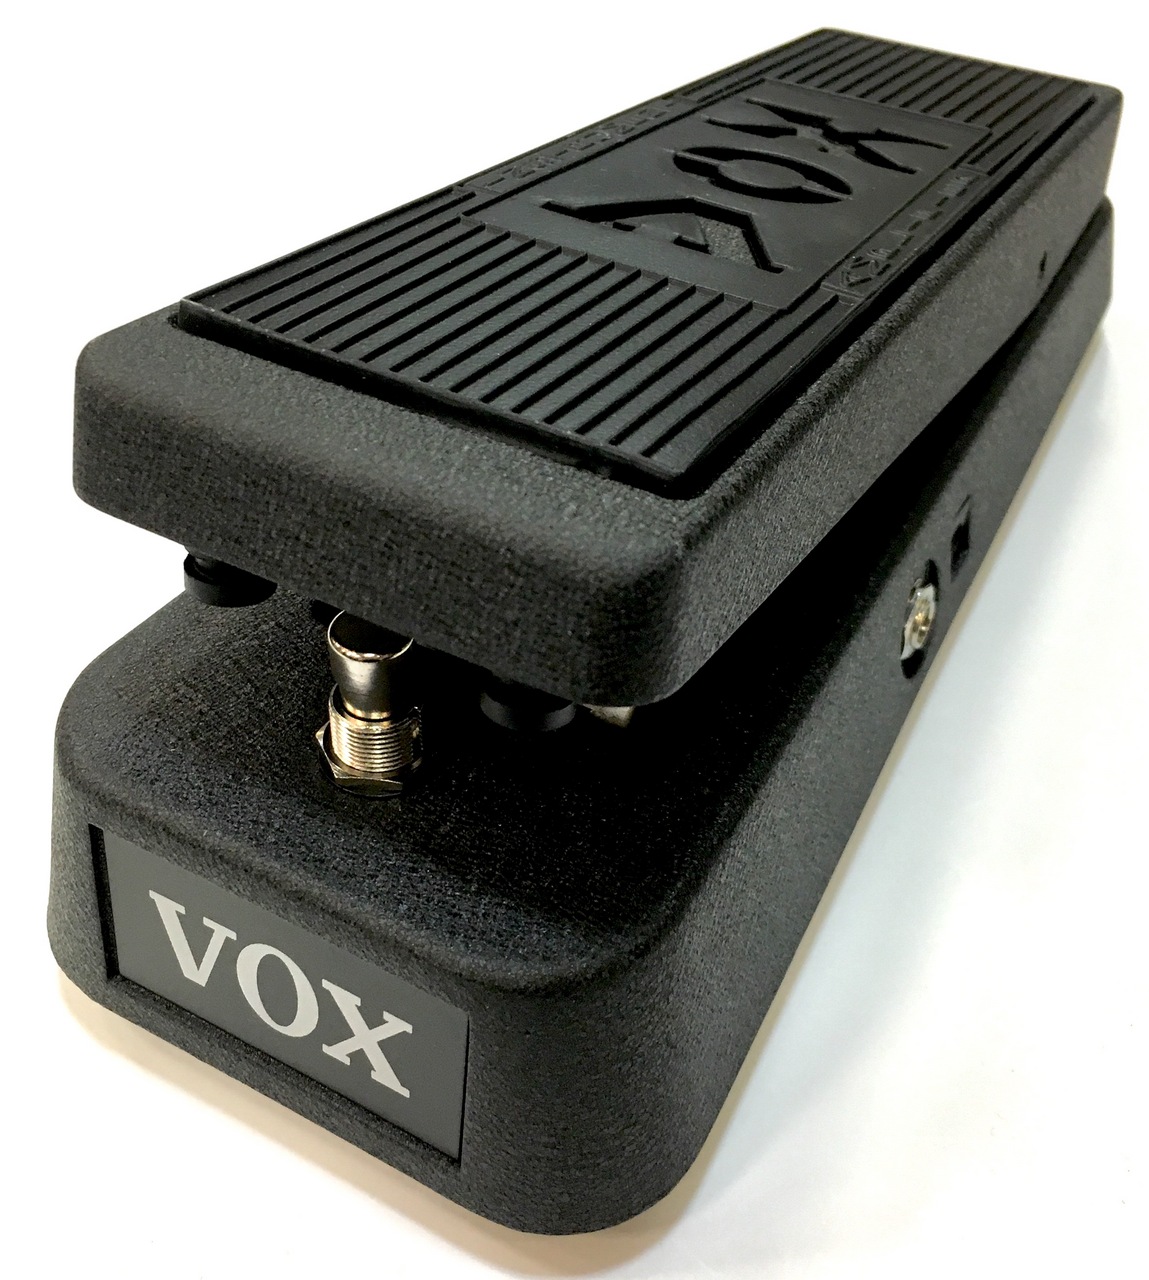 VOX V845 Classic Wah Wah Pedal 【アウトレット特価】【送料無料】（B ...